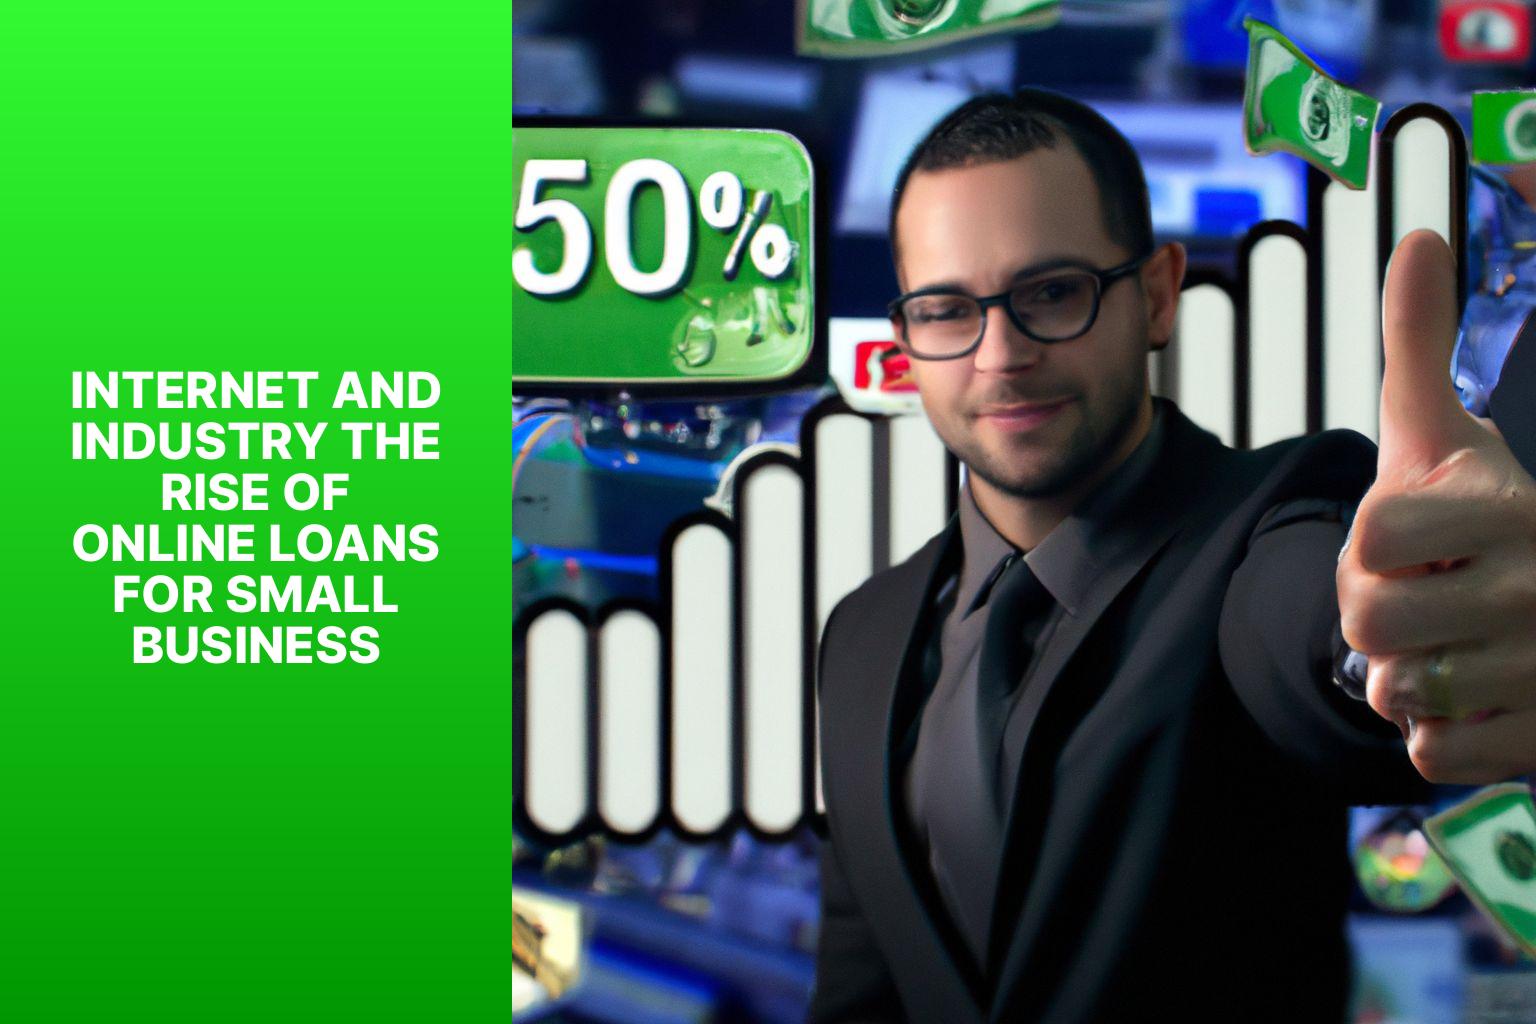 Internet and Industry The Rise of Online Loans for Small Business